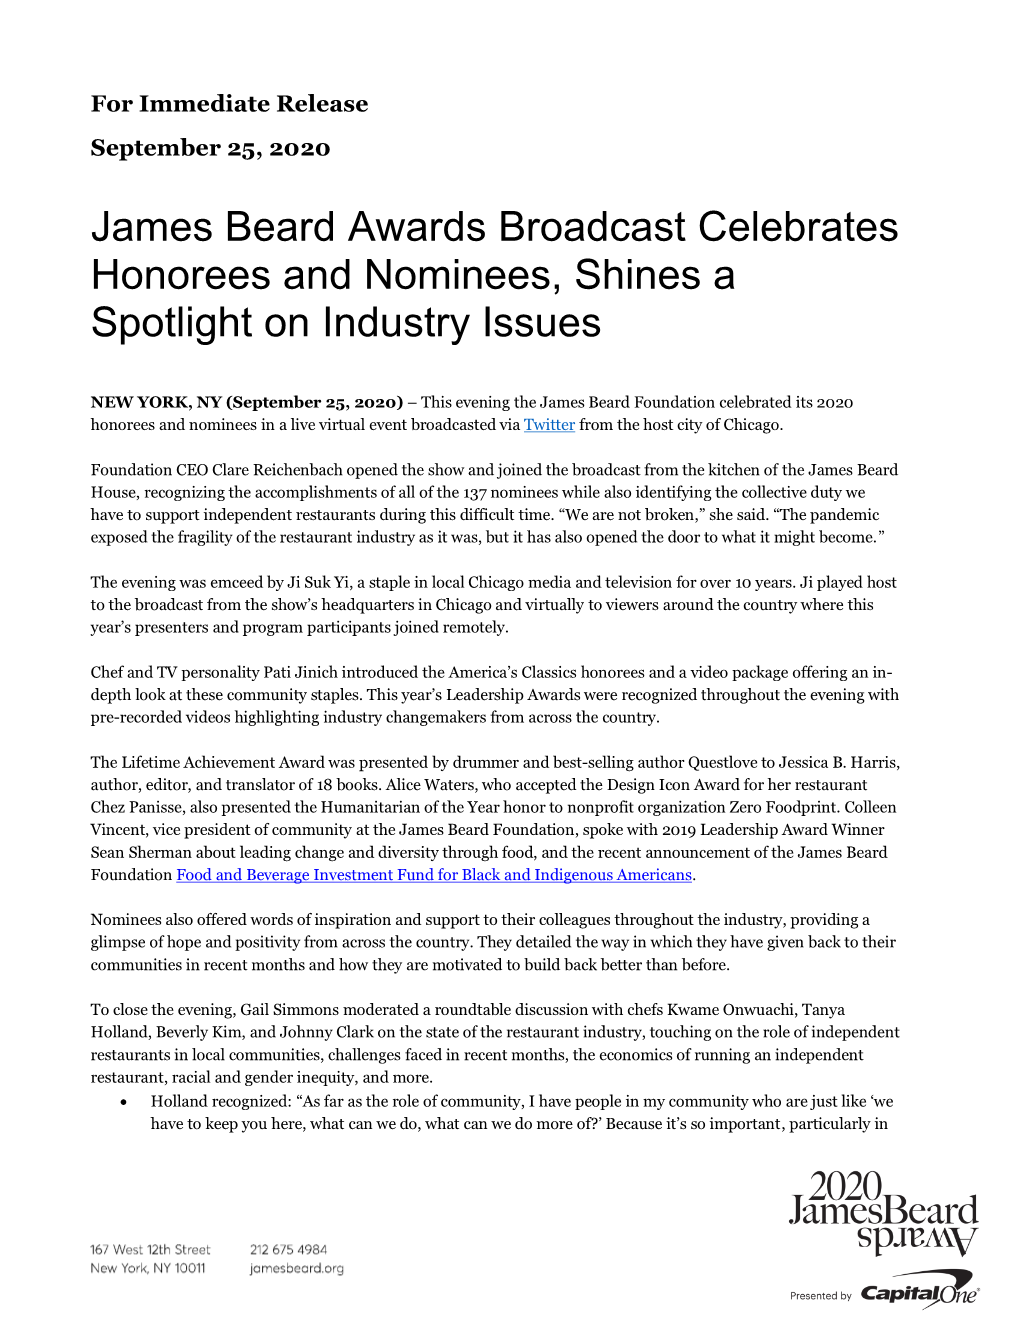 James Beard Awards Broadcast Celebrates Honorees and Nominees, Shines a Spotlight on Industry Issues